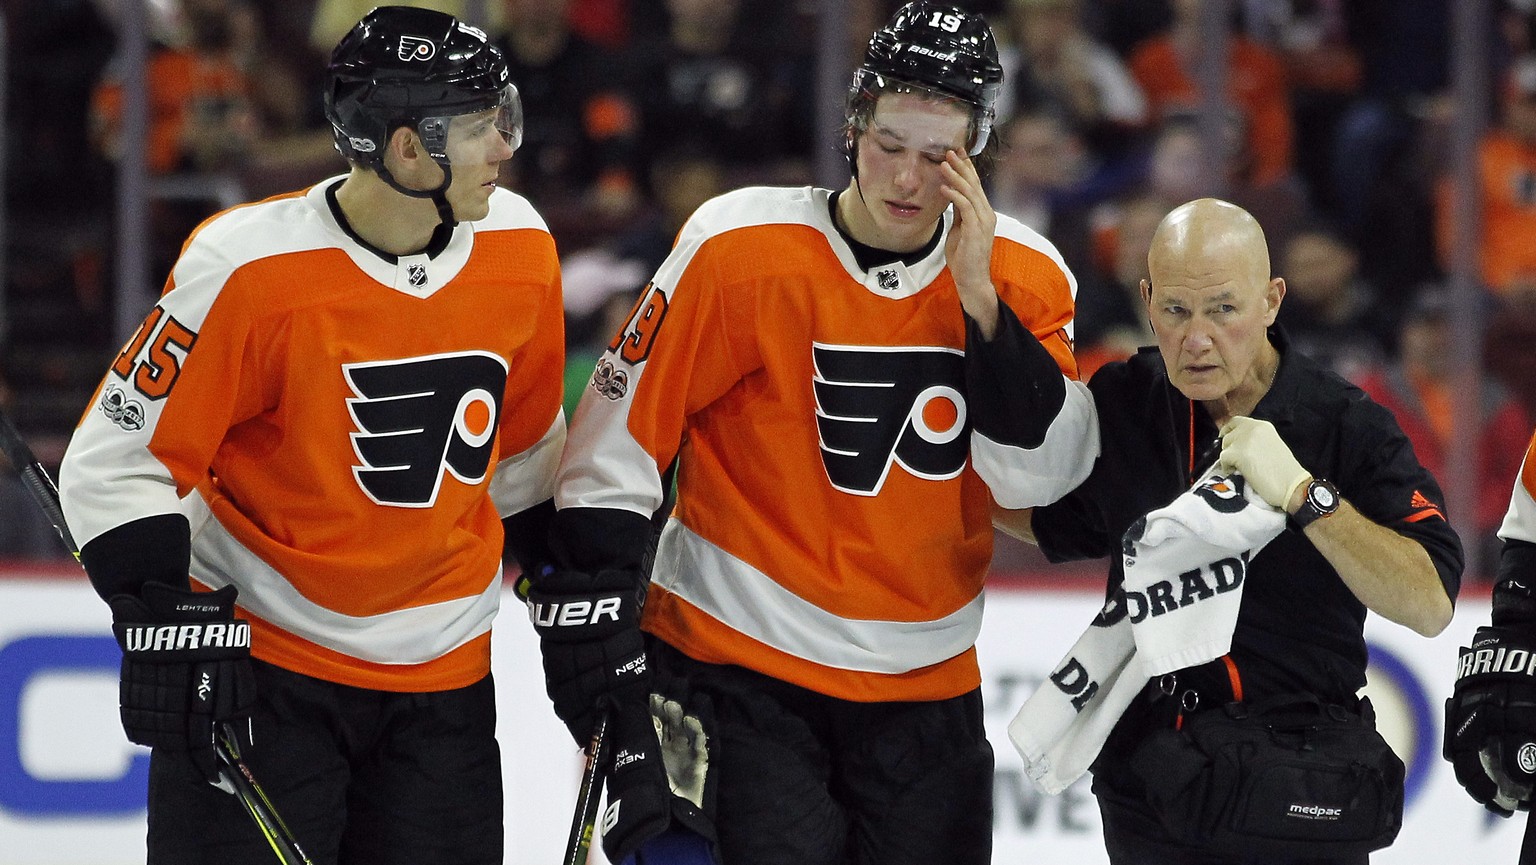 CORRECTS TO SAY PATRICK DID NOT RETURN TO THE GAME AFTER THE INJURY - Philadelphia Flyers&#039; Nolan Patrick, center, is helped of the ice by Jori Lehtera, left and a member of the training staff aft ...